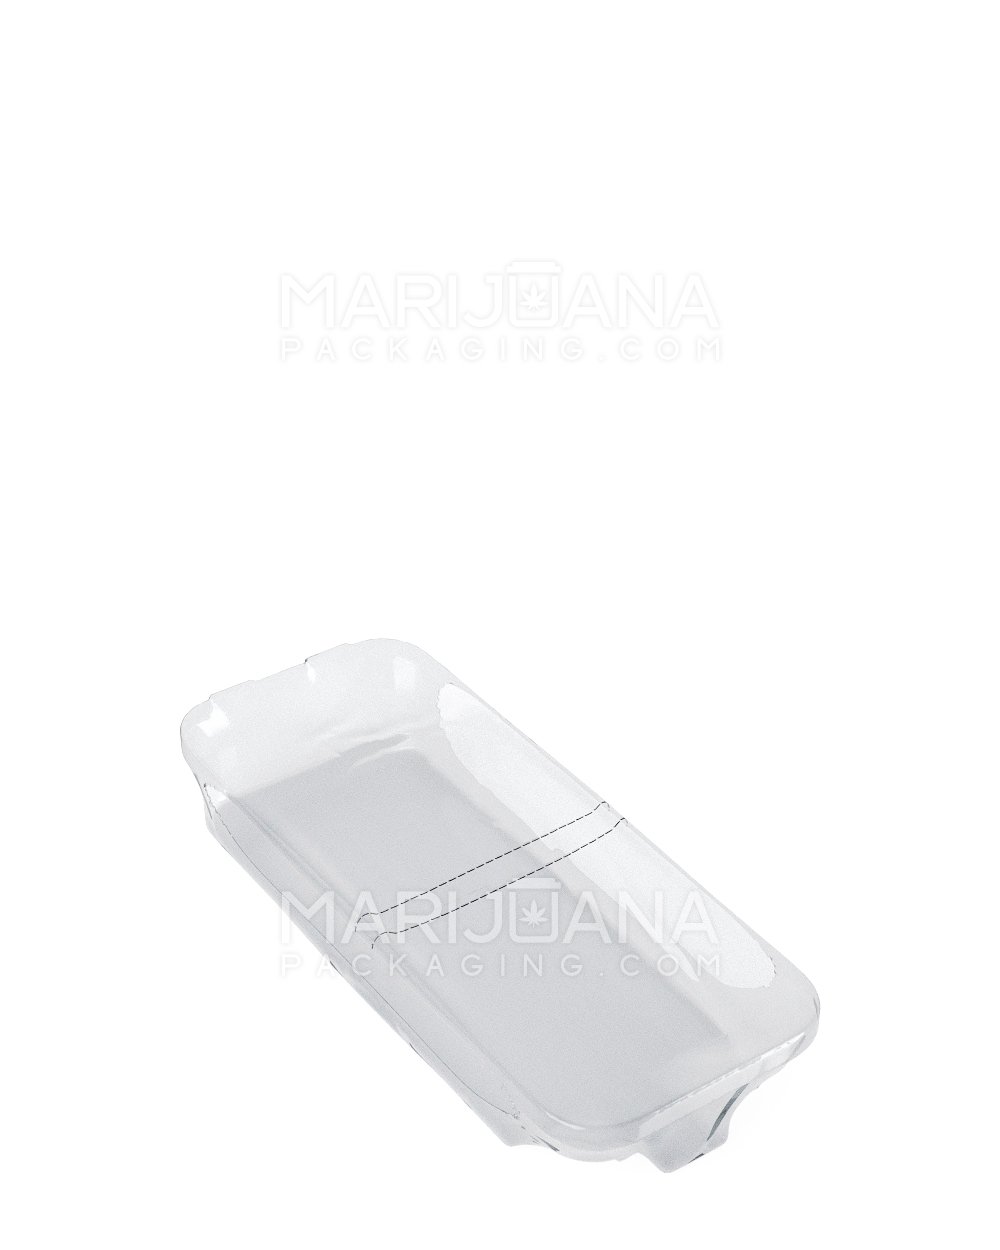 Tamper Evident | Heat Shrink Bands for Small Snap Box Case | 60mm x 120mm - Clear Plastic - 1000 Count - 1